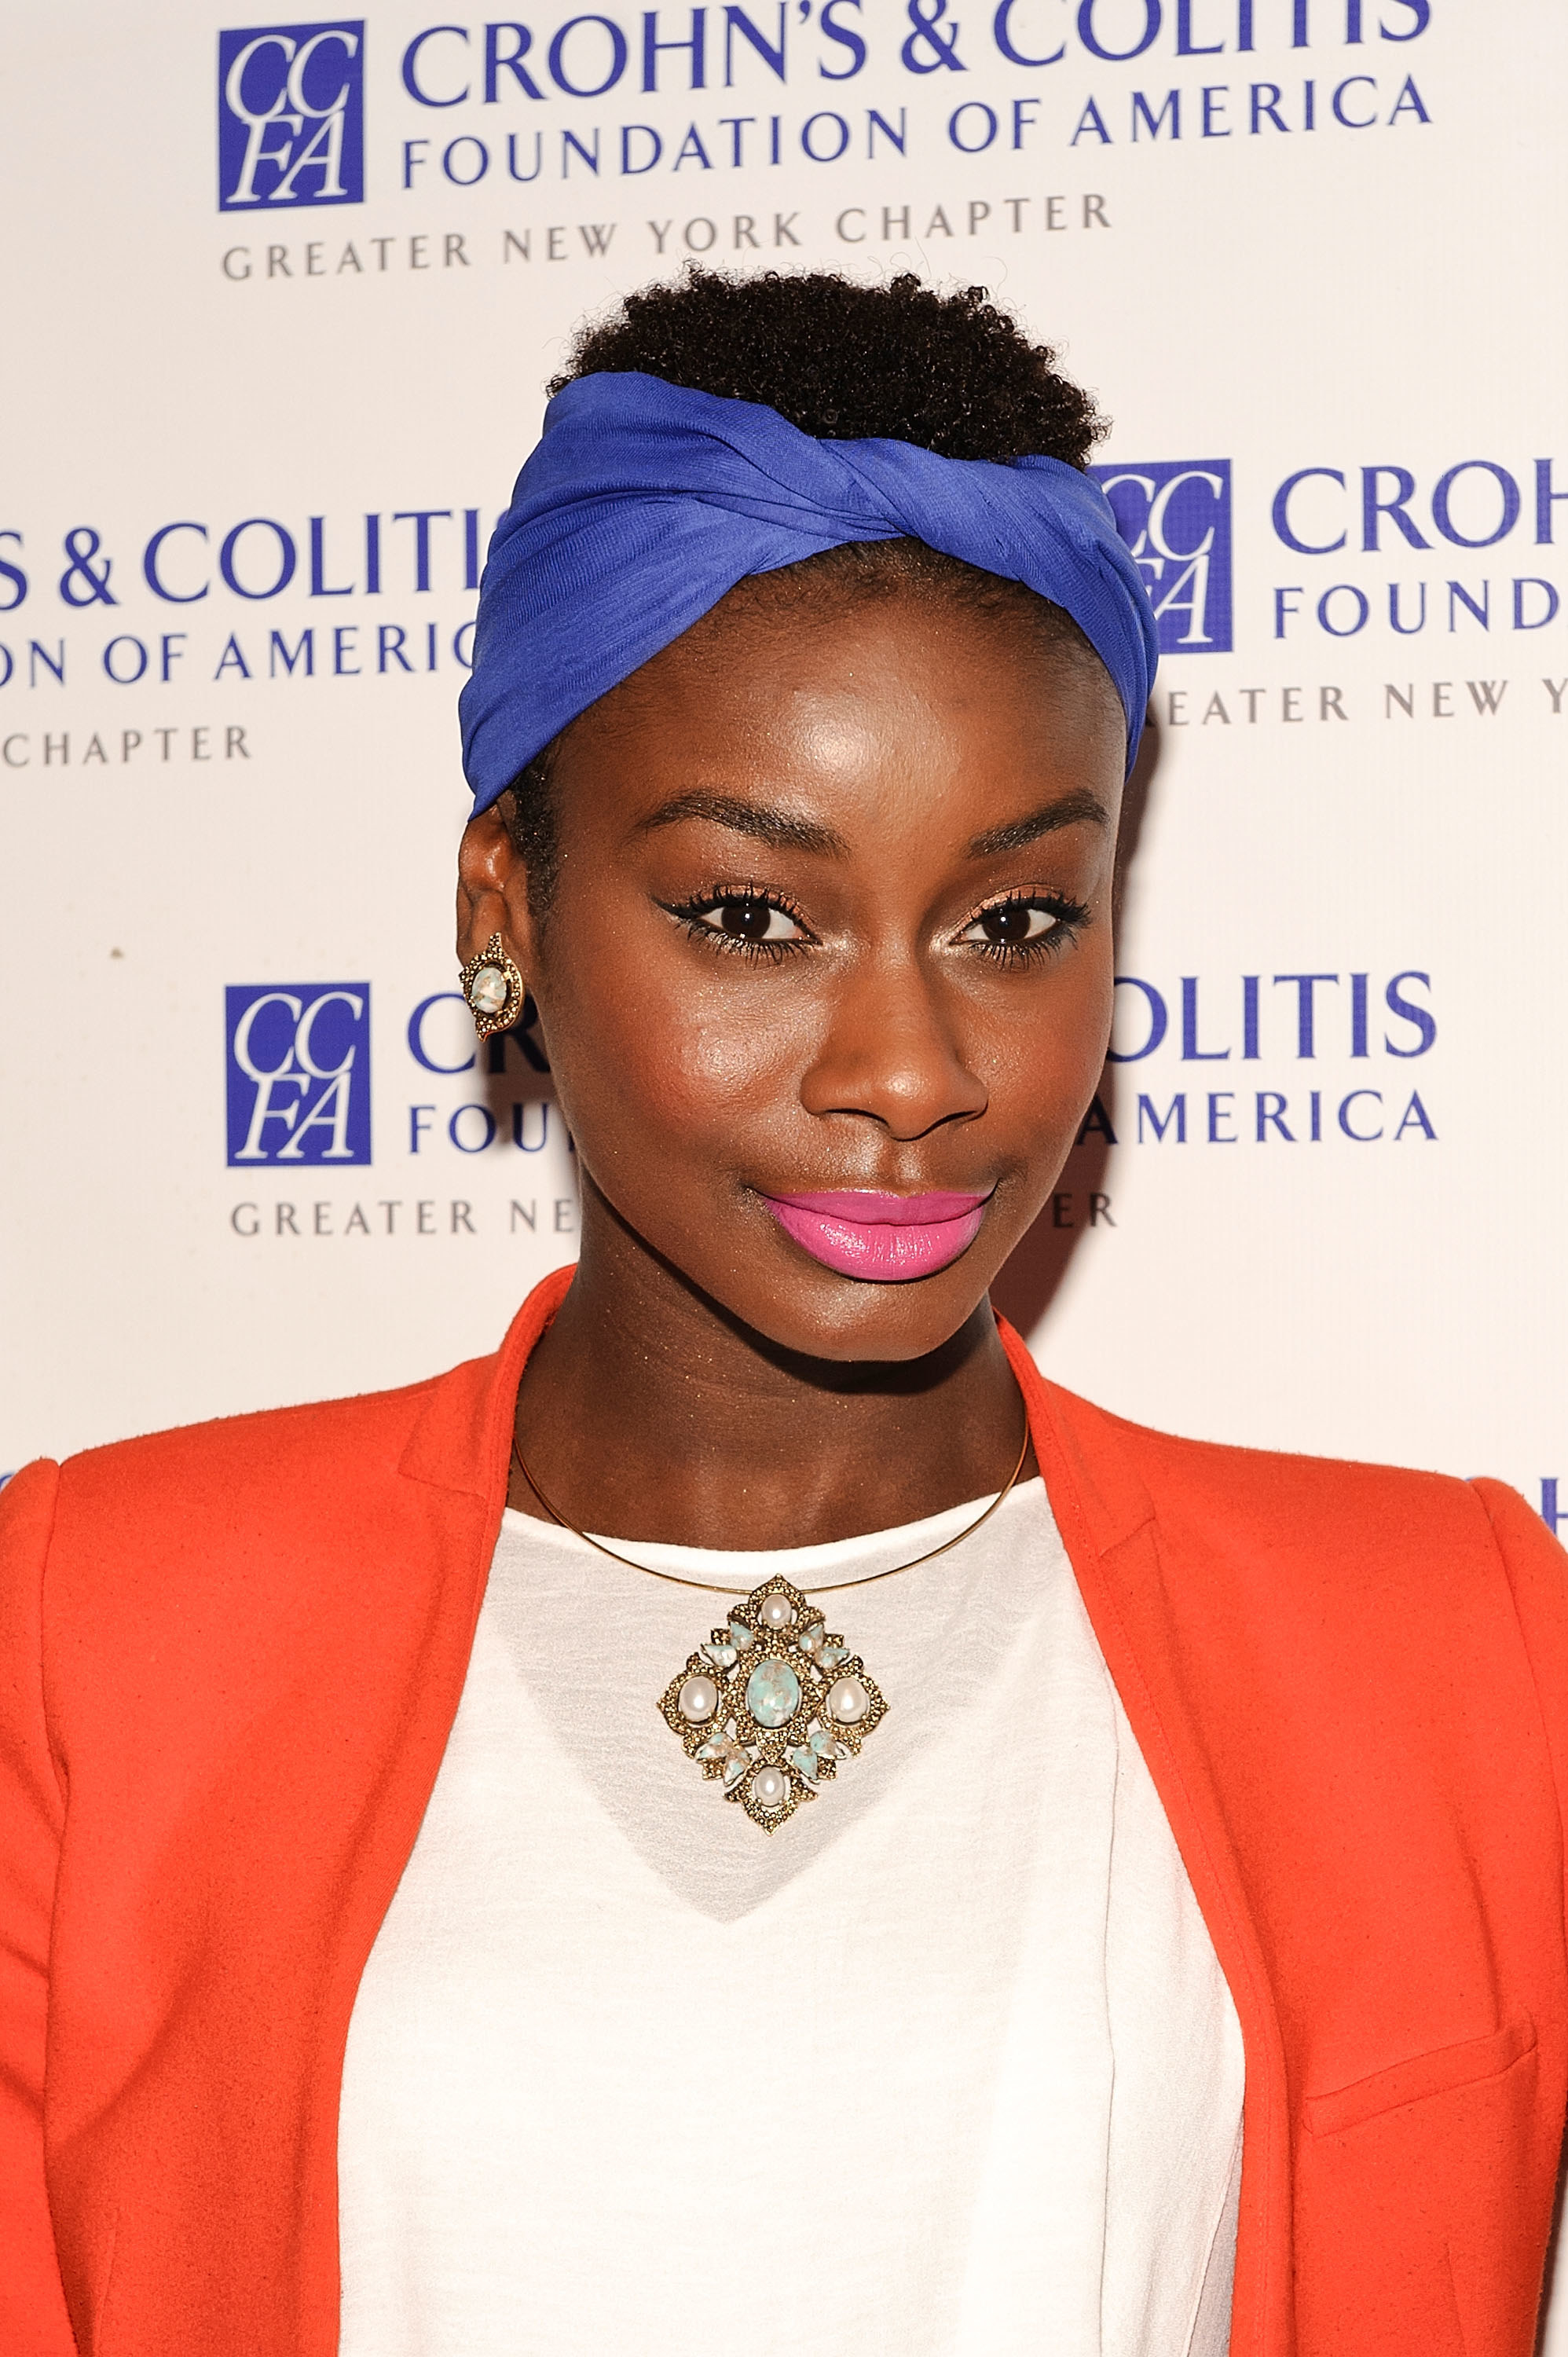 Fashion model Aminat Ayinde attends the 19th Annual Women of Distinction Awards Luncheon at The Waldorf Astoria on May 1, 2012 in New York City